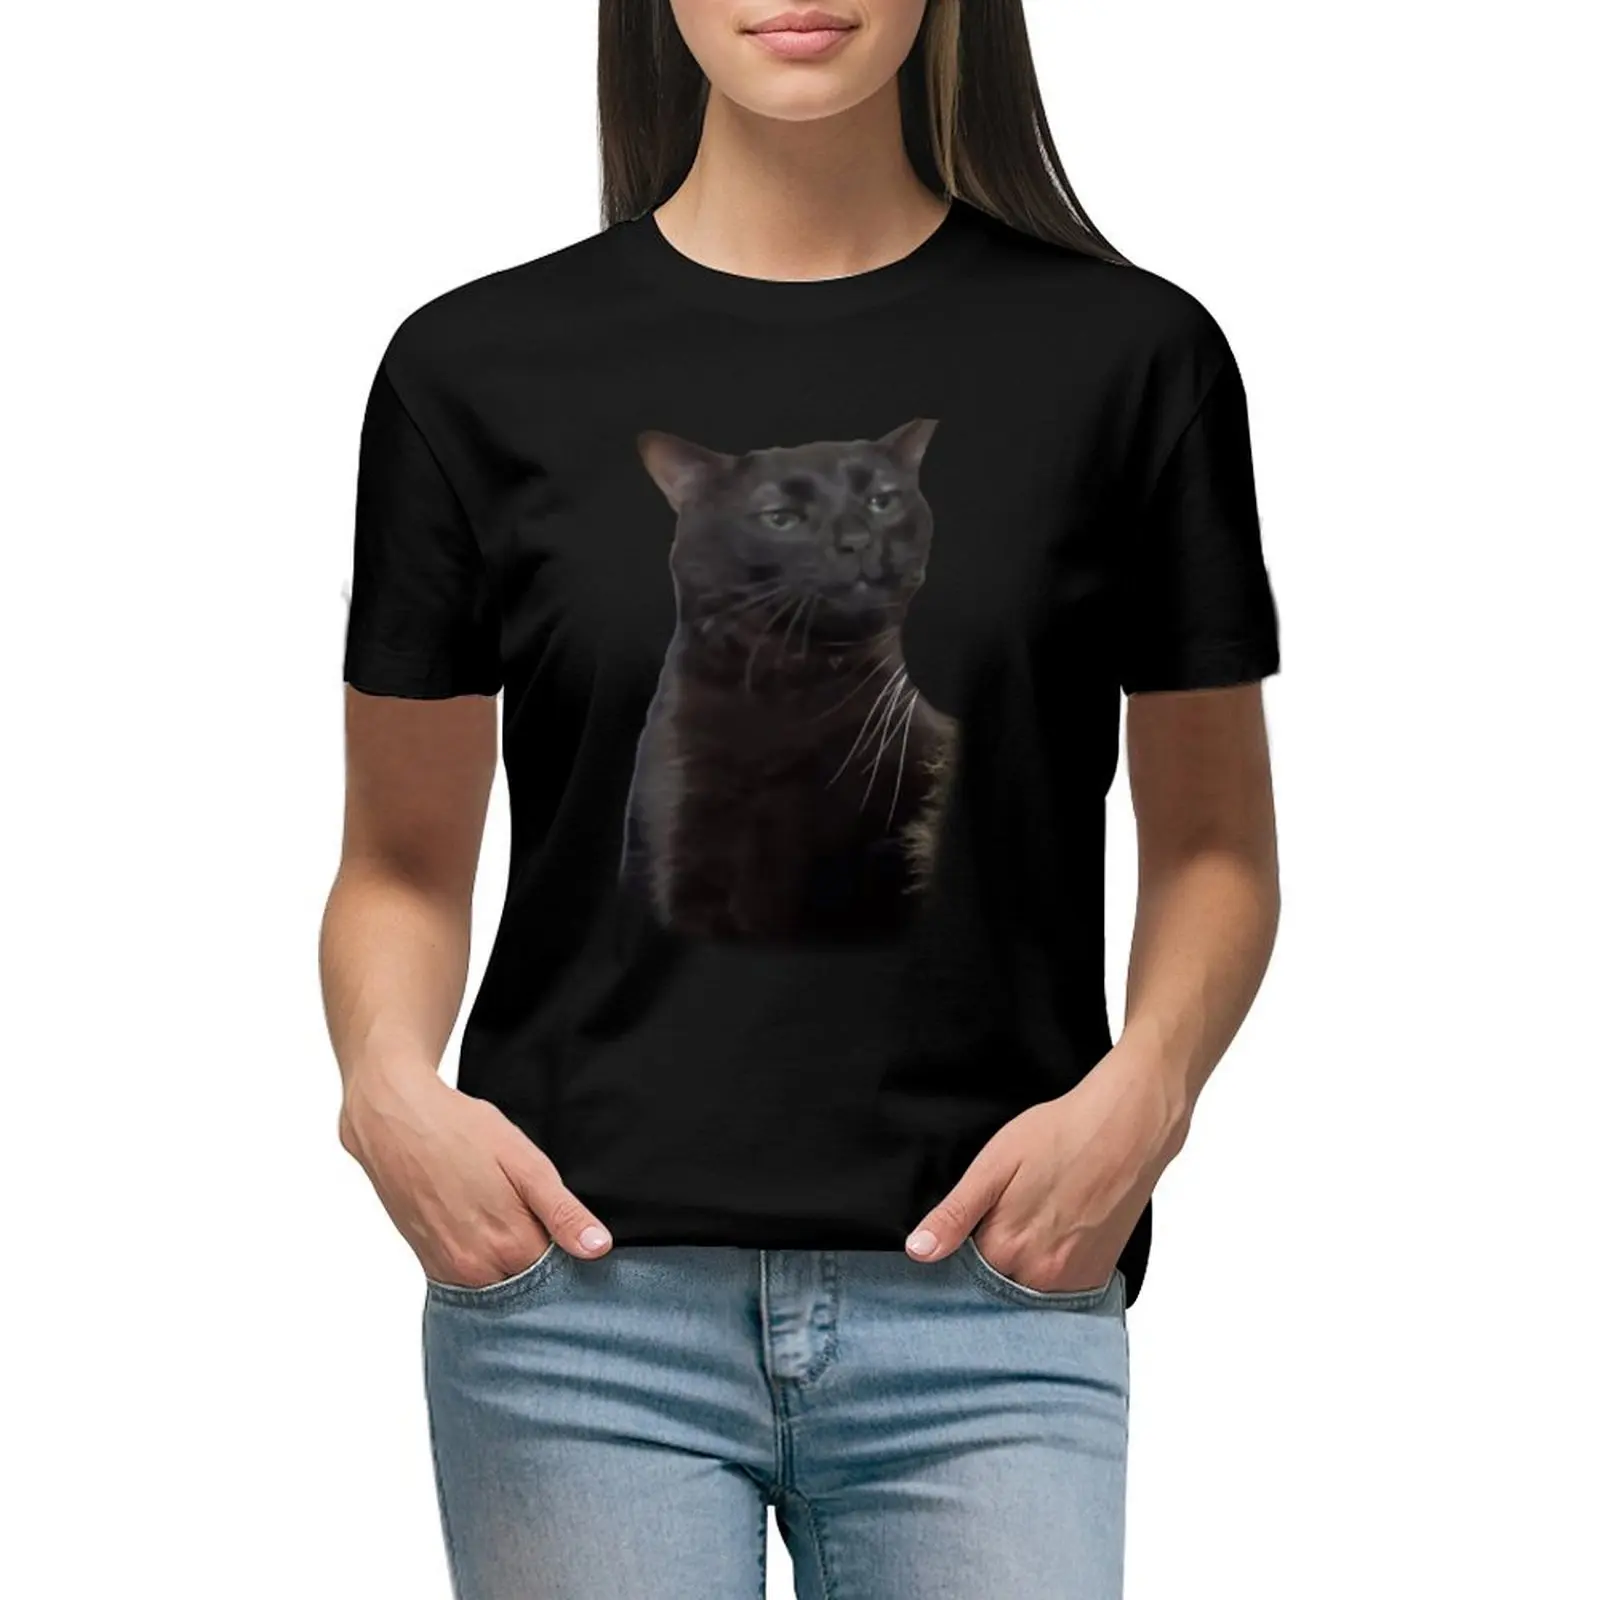 

Black Cat Zoning Out Staring Meme Funny T-shirt aesthetic clothes tees woman t shirt